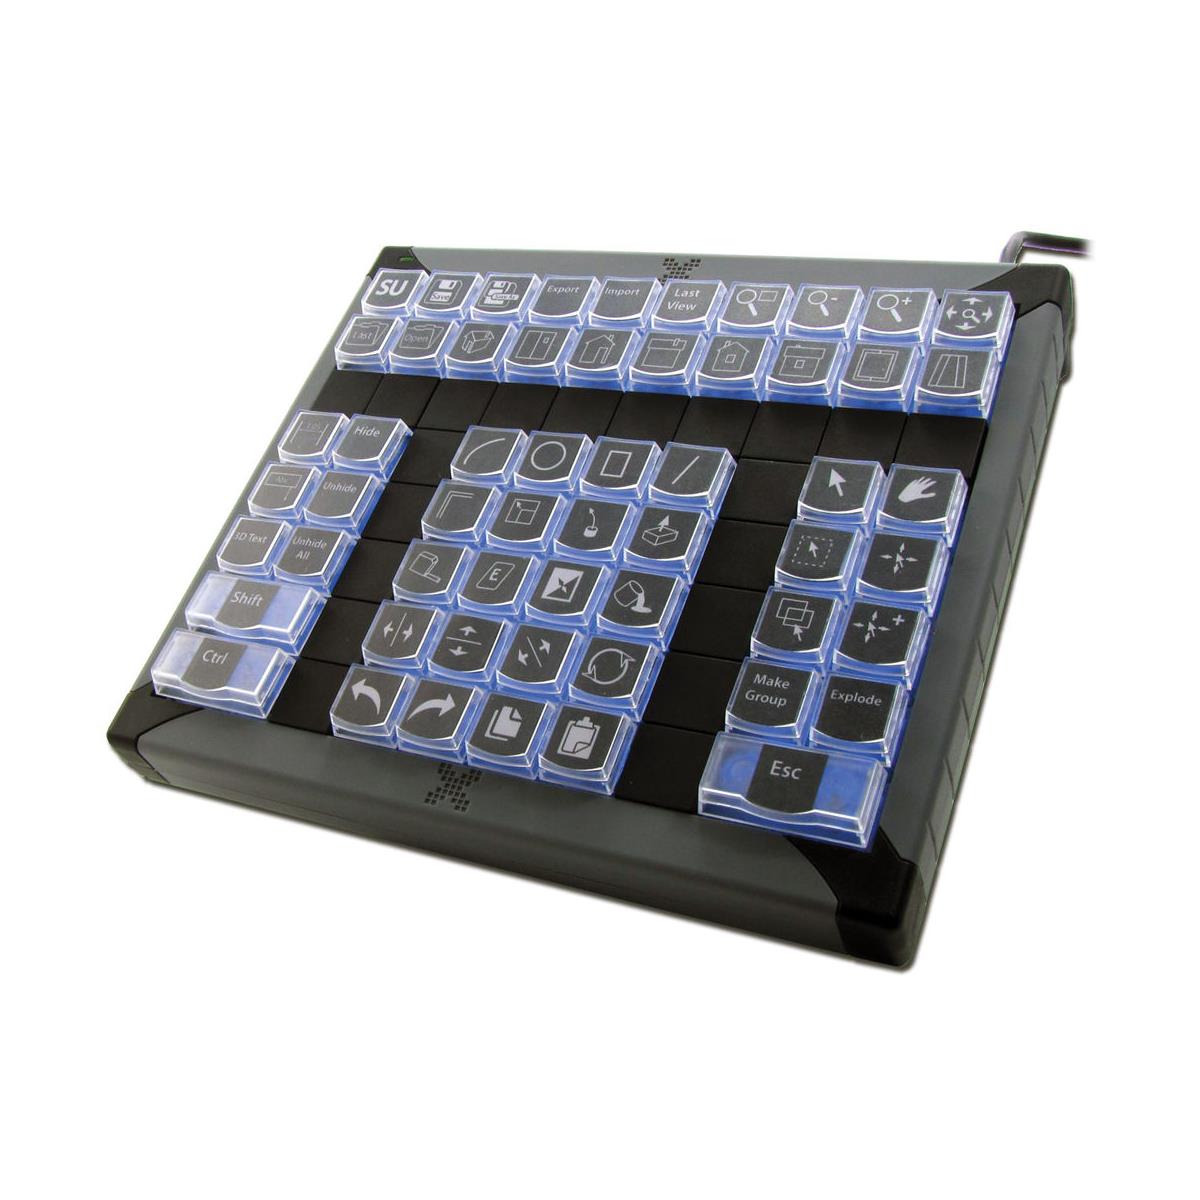 Photos - Other Video Equipment X-Keys XK-60 60-Keys USB Programmable Keyboard, Blue and Red Backlighting